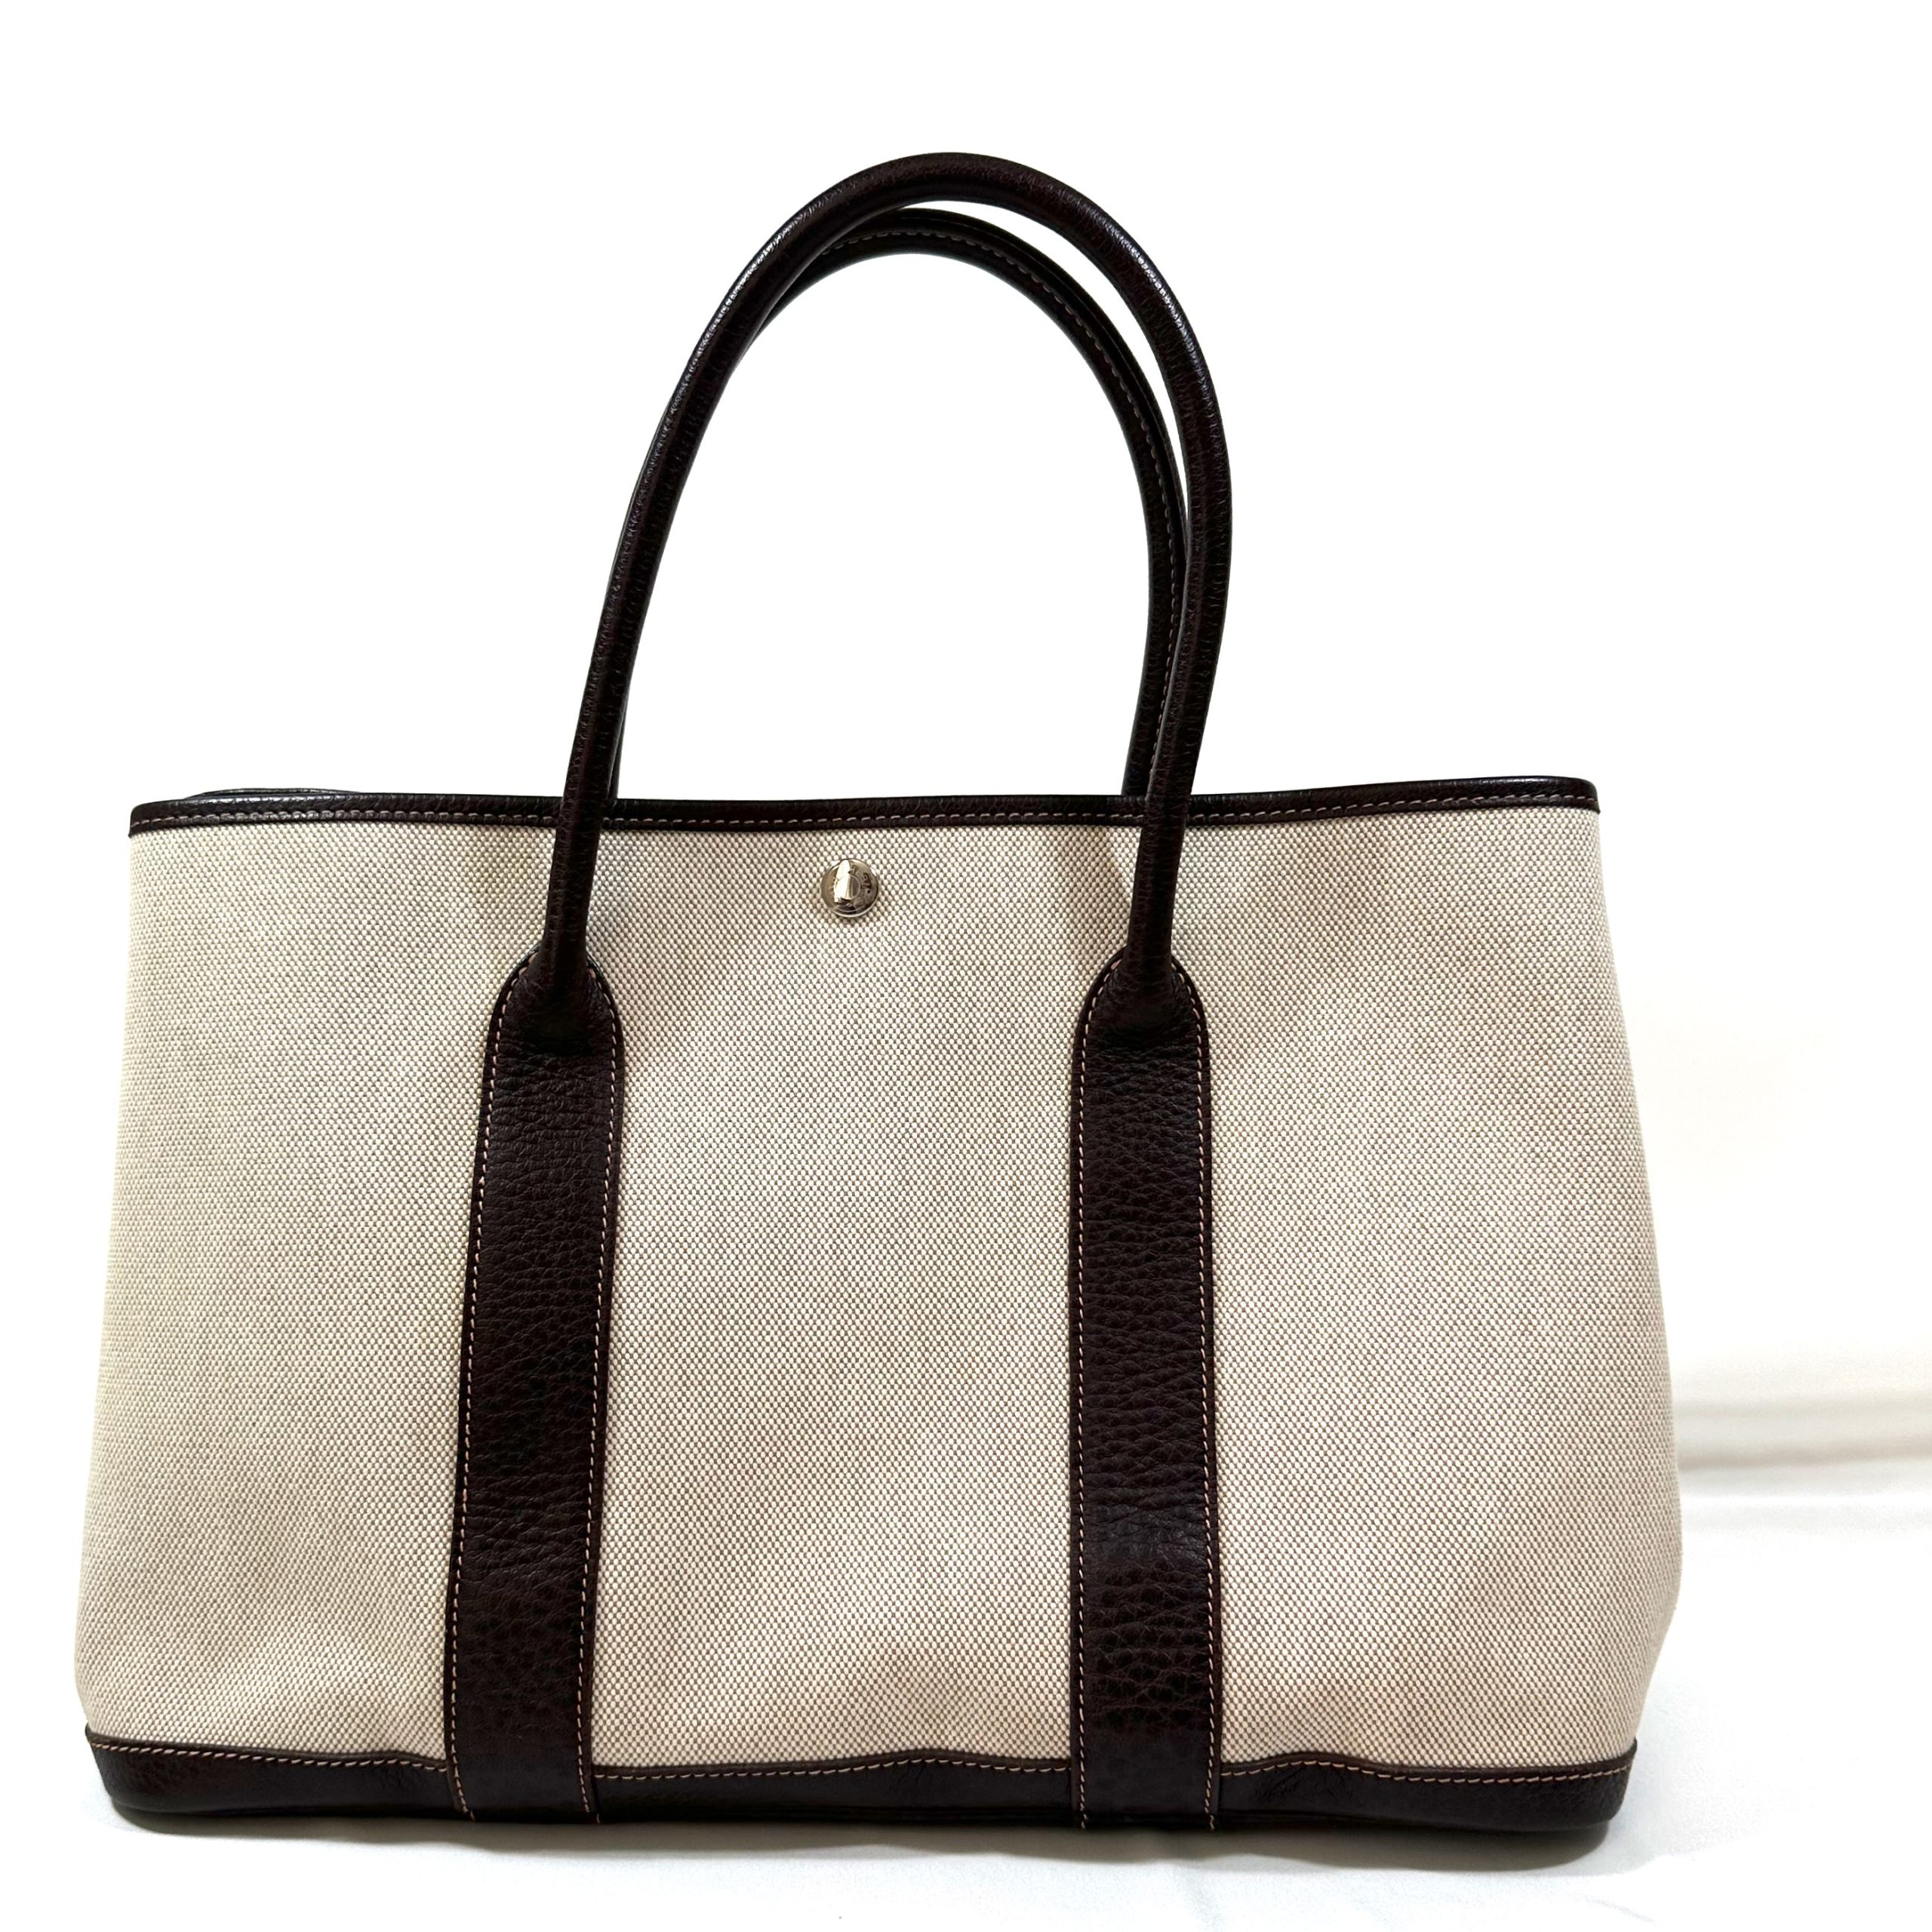 Hermes Garden Party Bag Togo Leather In Grey